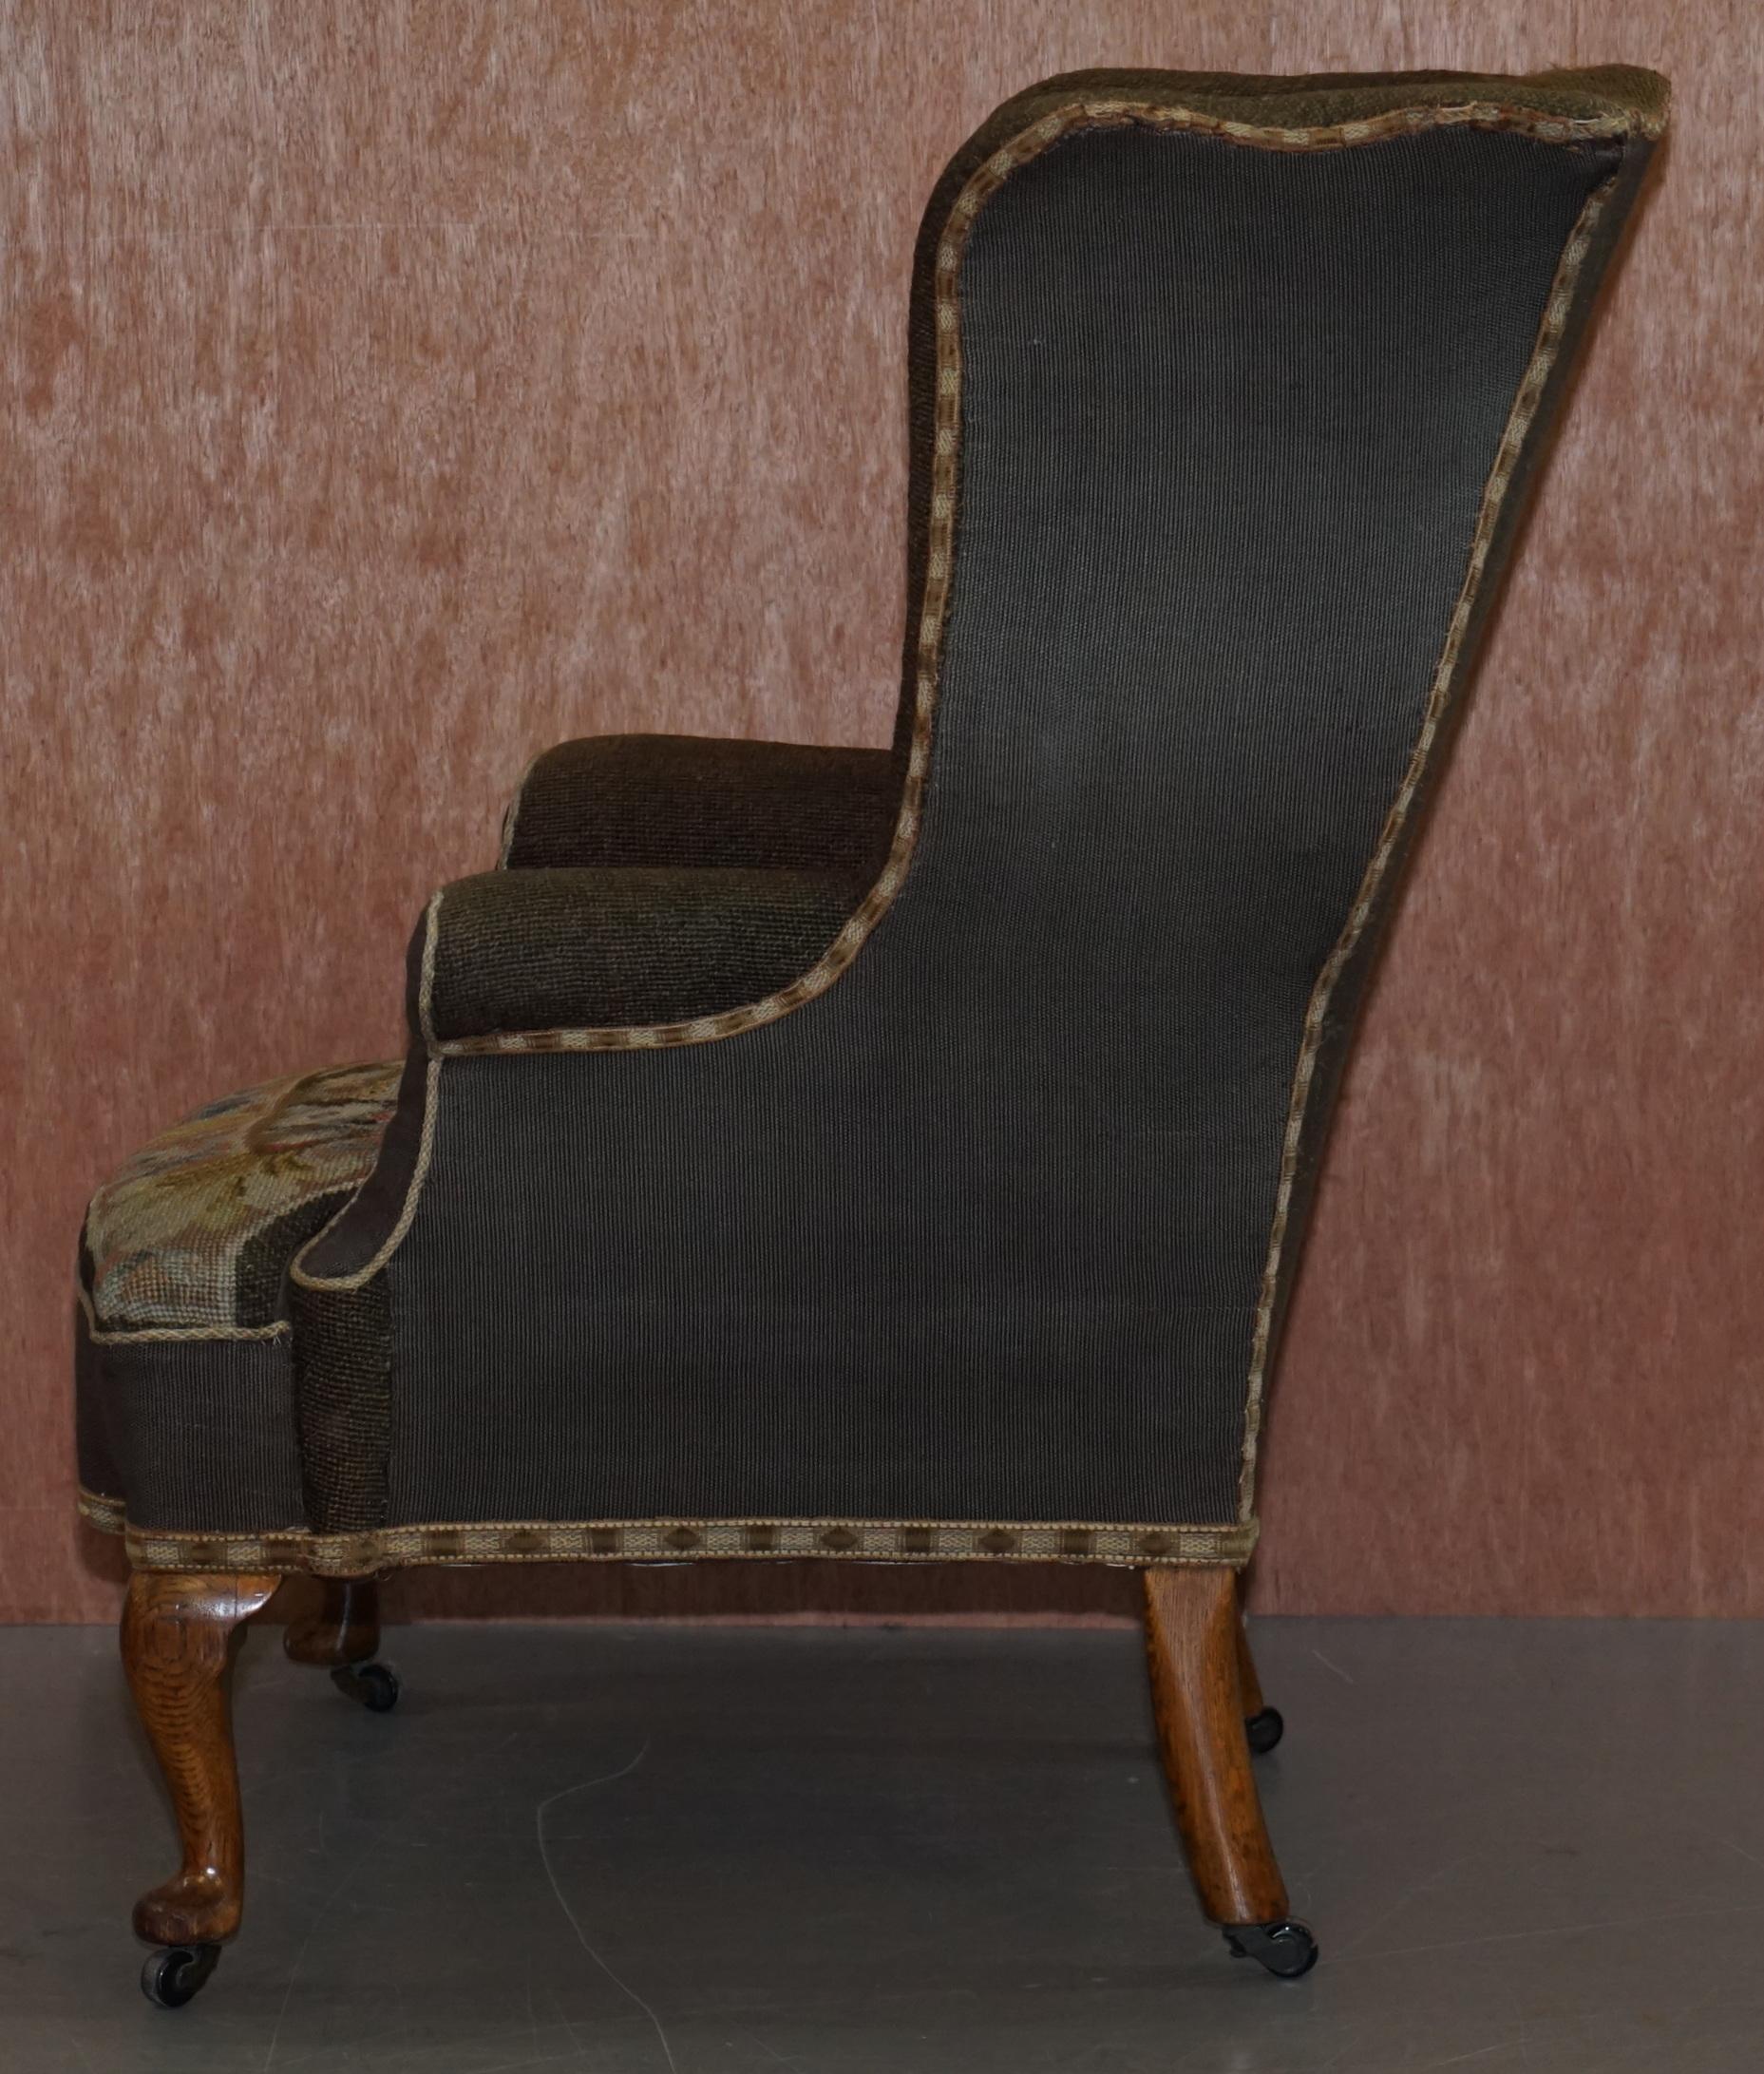 Original circa 1840 Antique Victorian Wingback Armchair Embroidered Upholstery For Sale 8